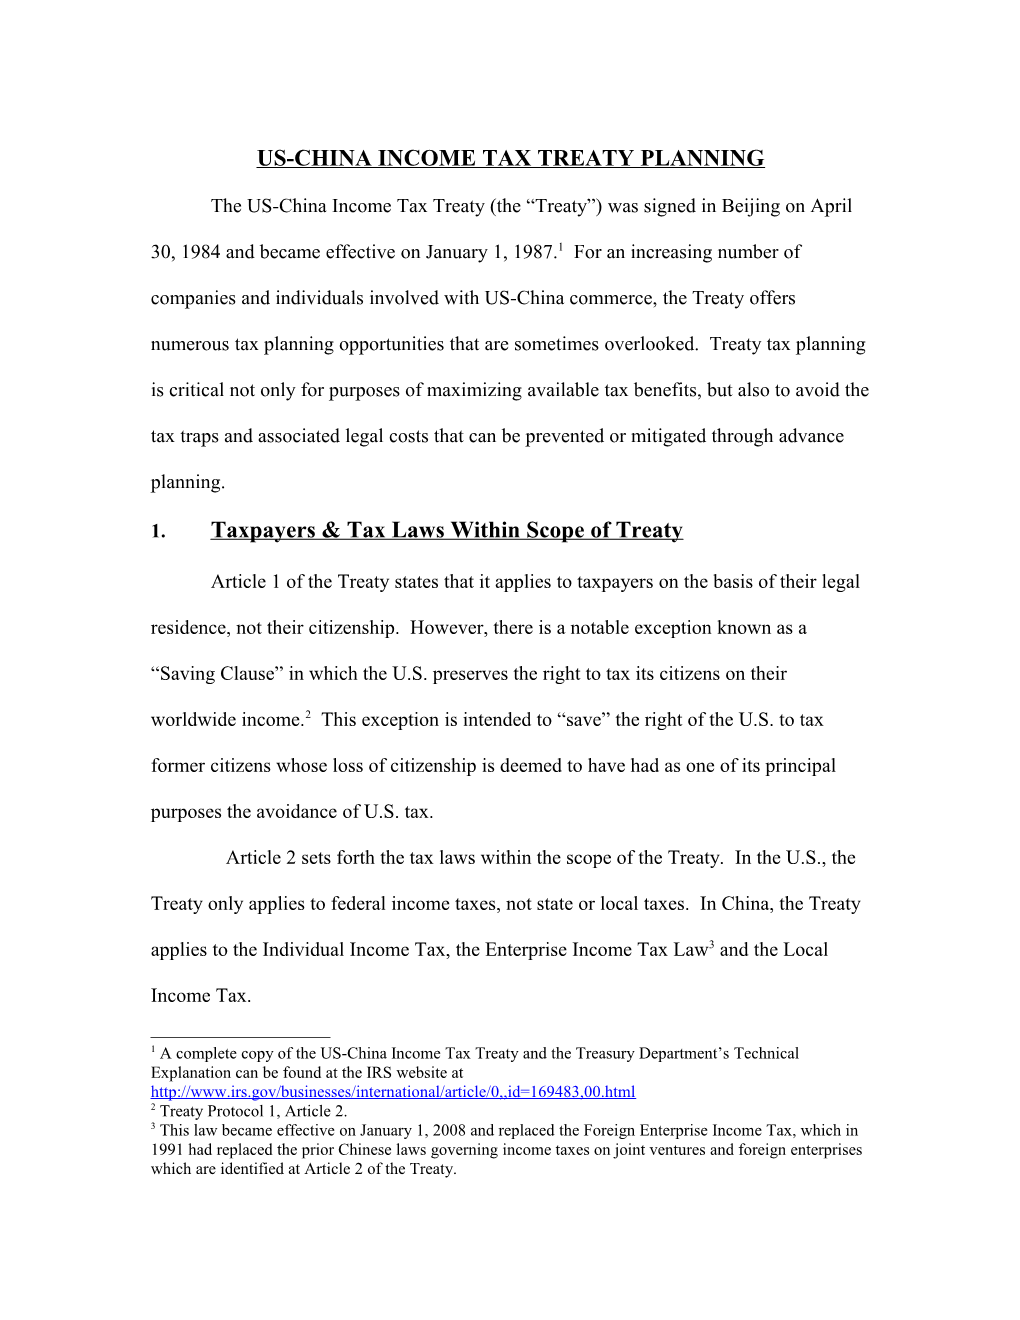 Overview of the Us-China Income Tax Treaty